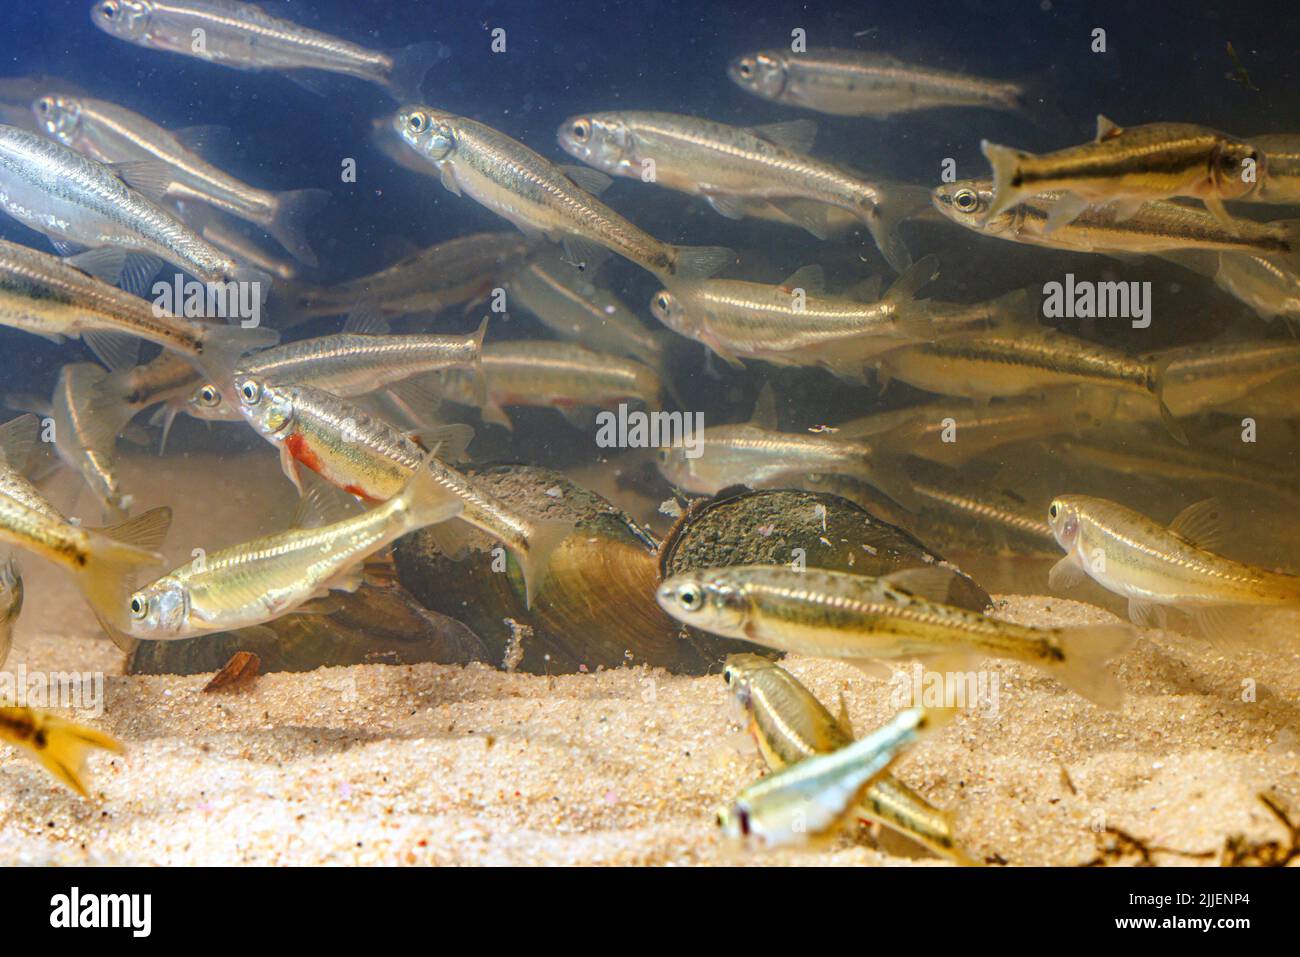 minnow, Eurasian minnow (Phoxinus phoxinus), school with river mussel, host for the mussel larvae, Germany Stock Photo